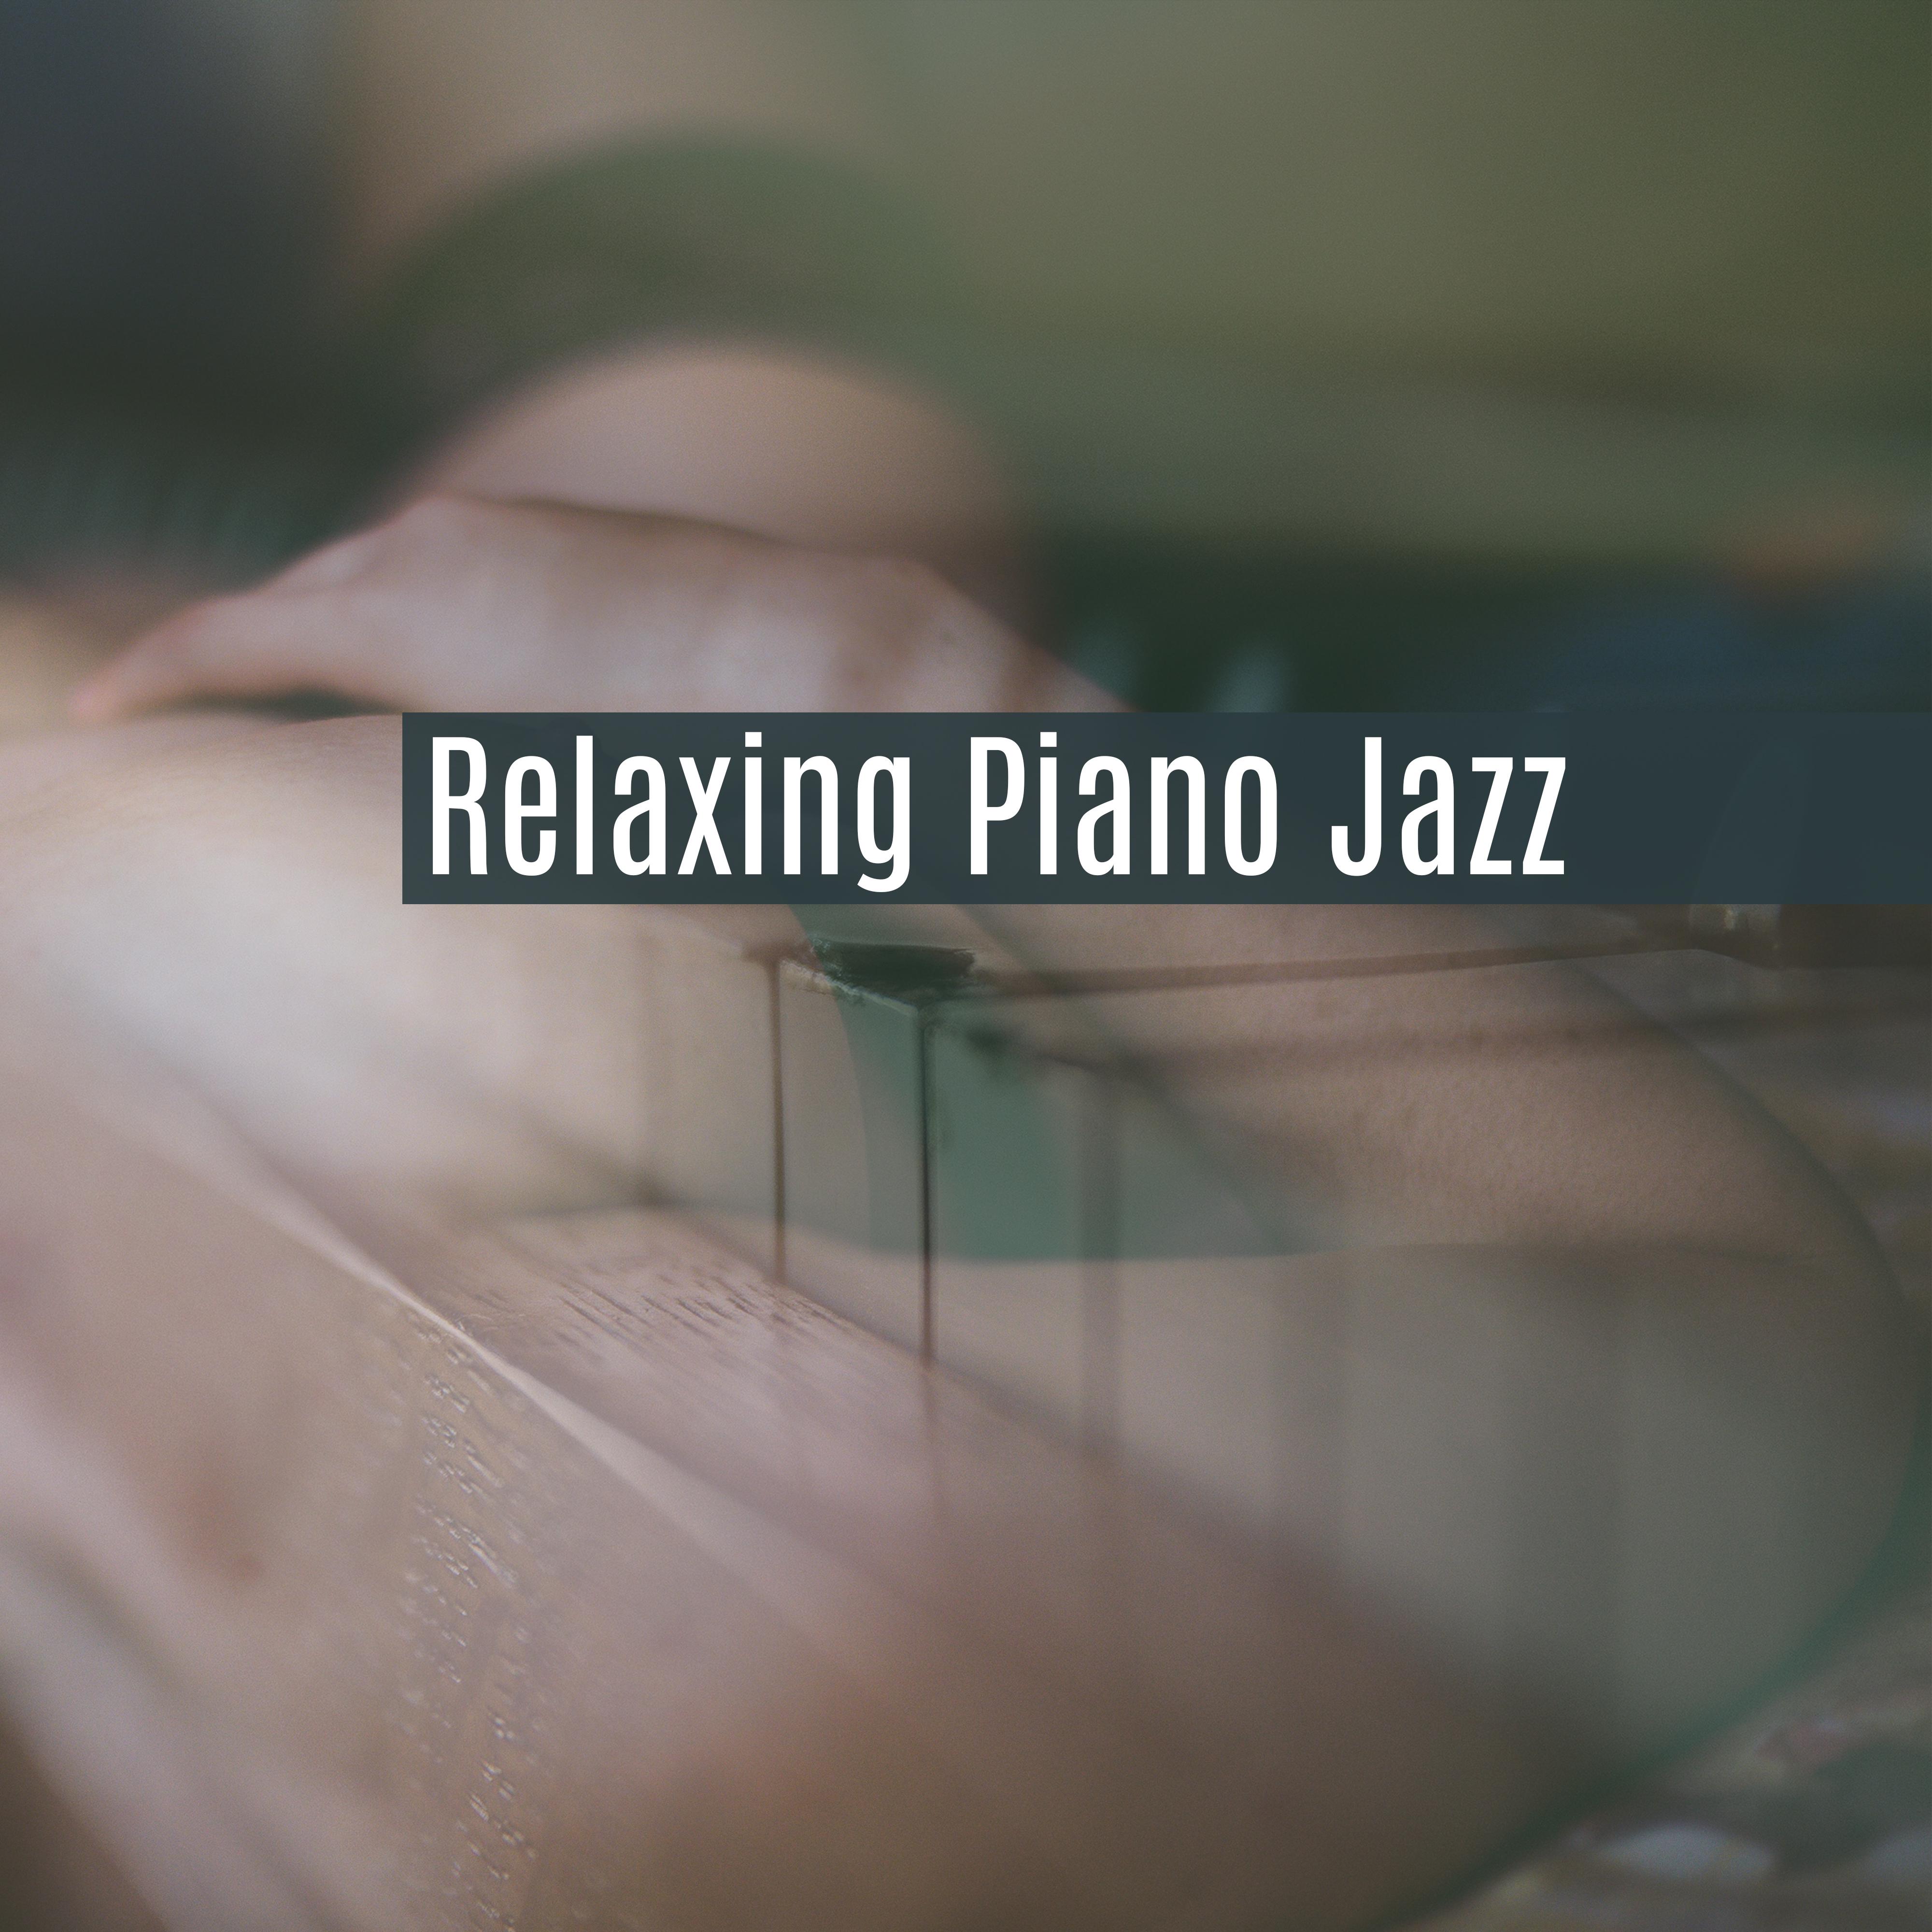 Relaxing Piano Jazz  Sensual Music for Relaxation, Romantic Saxophone, Dinner by Candlelight, Erotic Music, Smooth Jazz